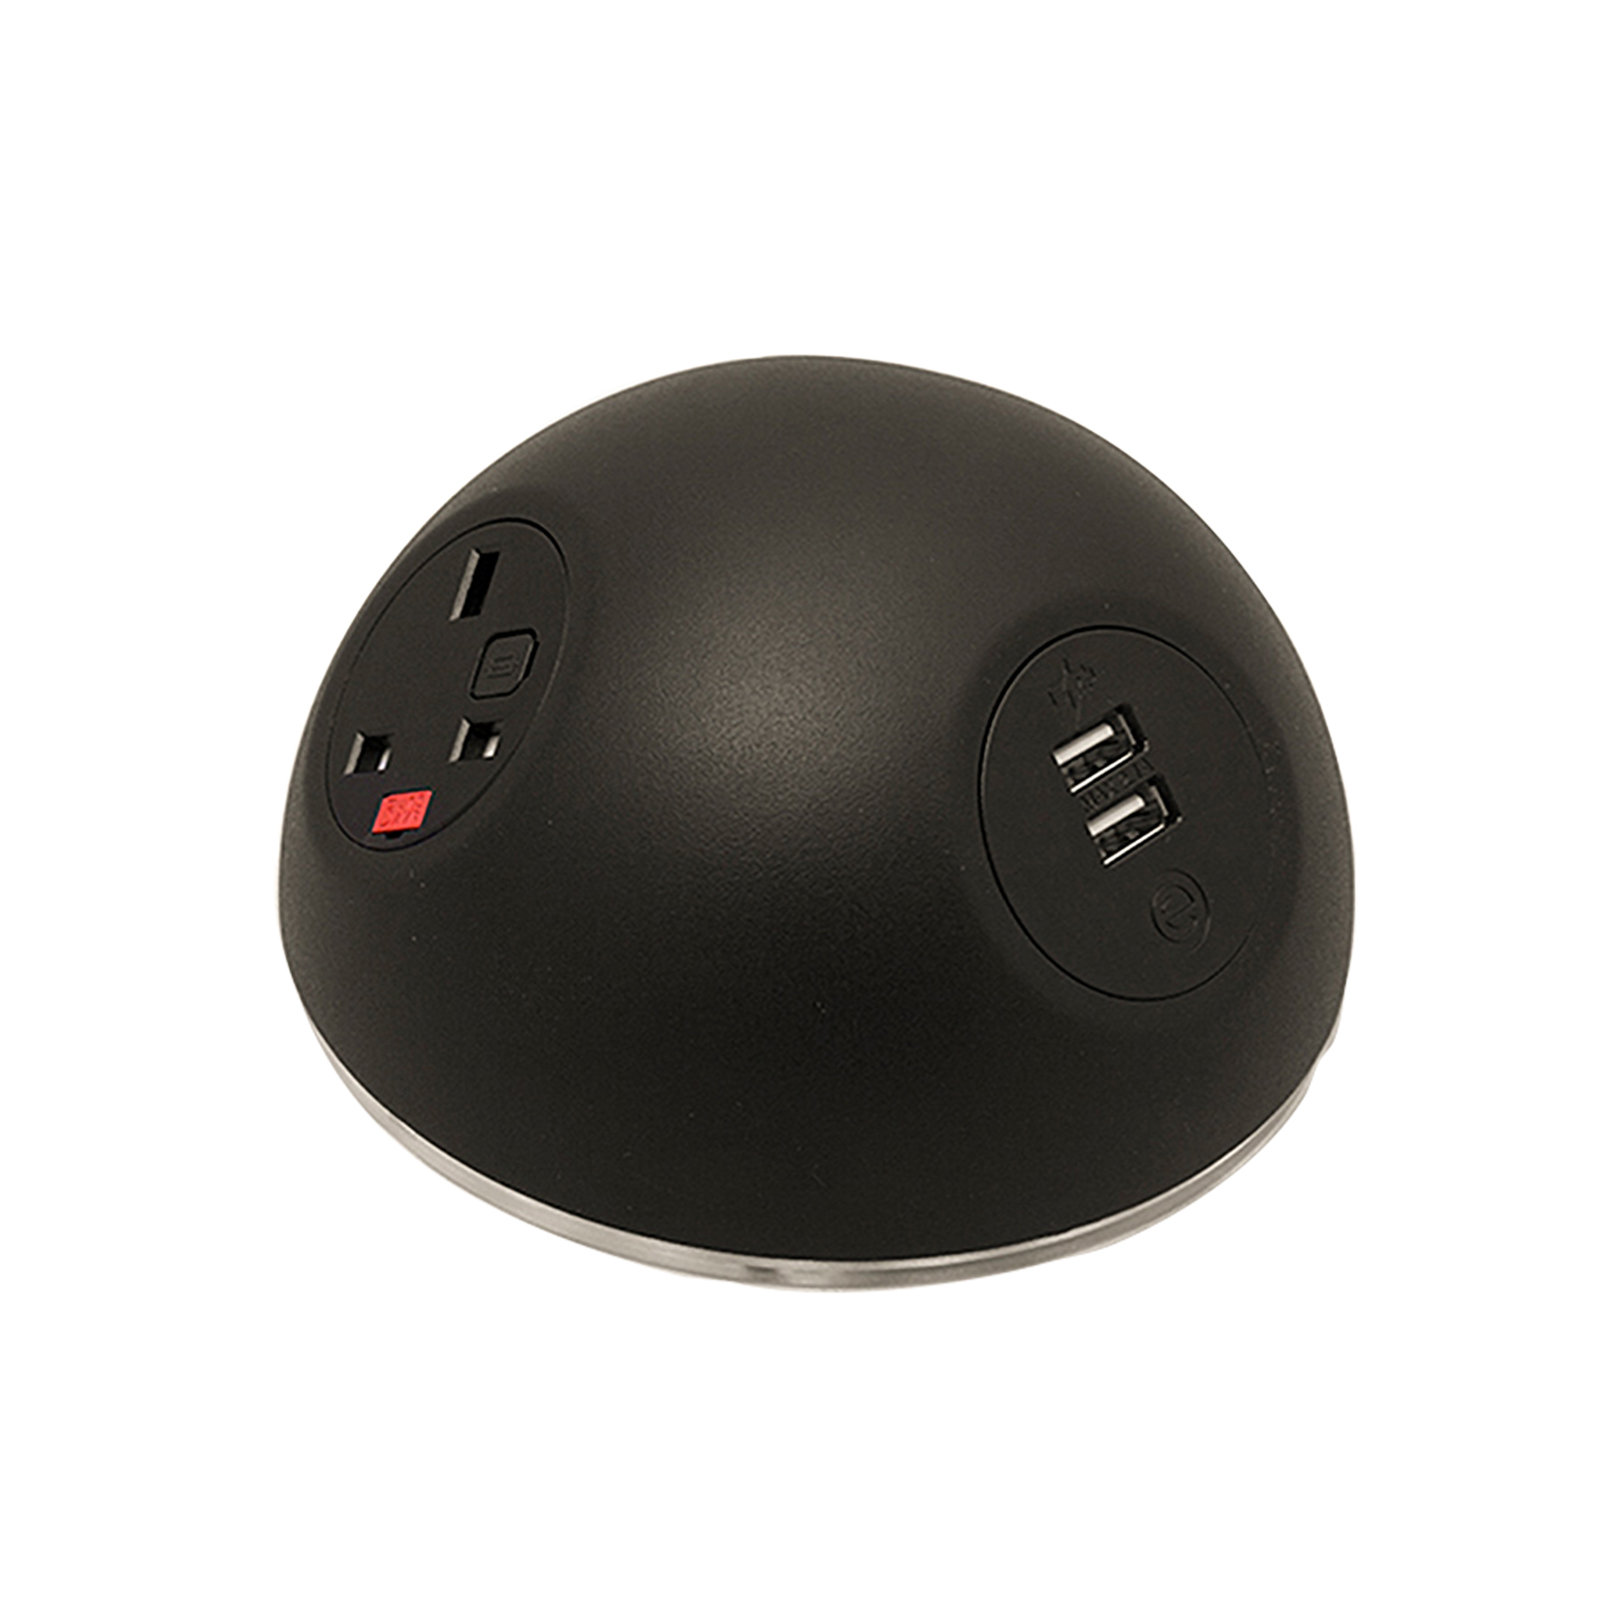 Pluto domed on-surface power module with 2 x UK sockets, 1 x TUF (A&C connectors) USB charger - dark blue